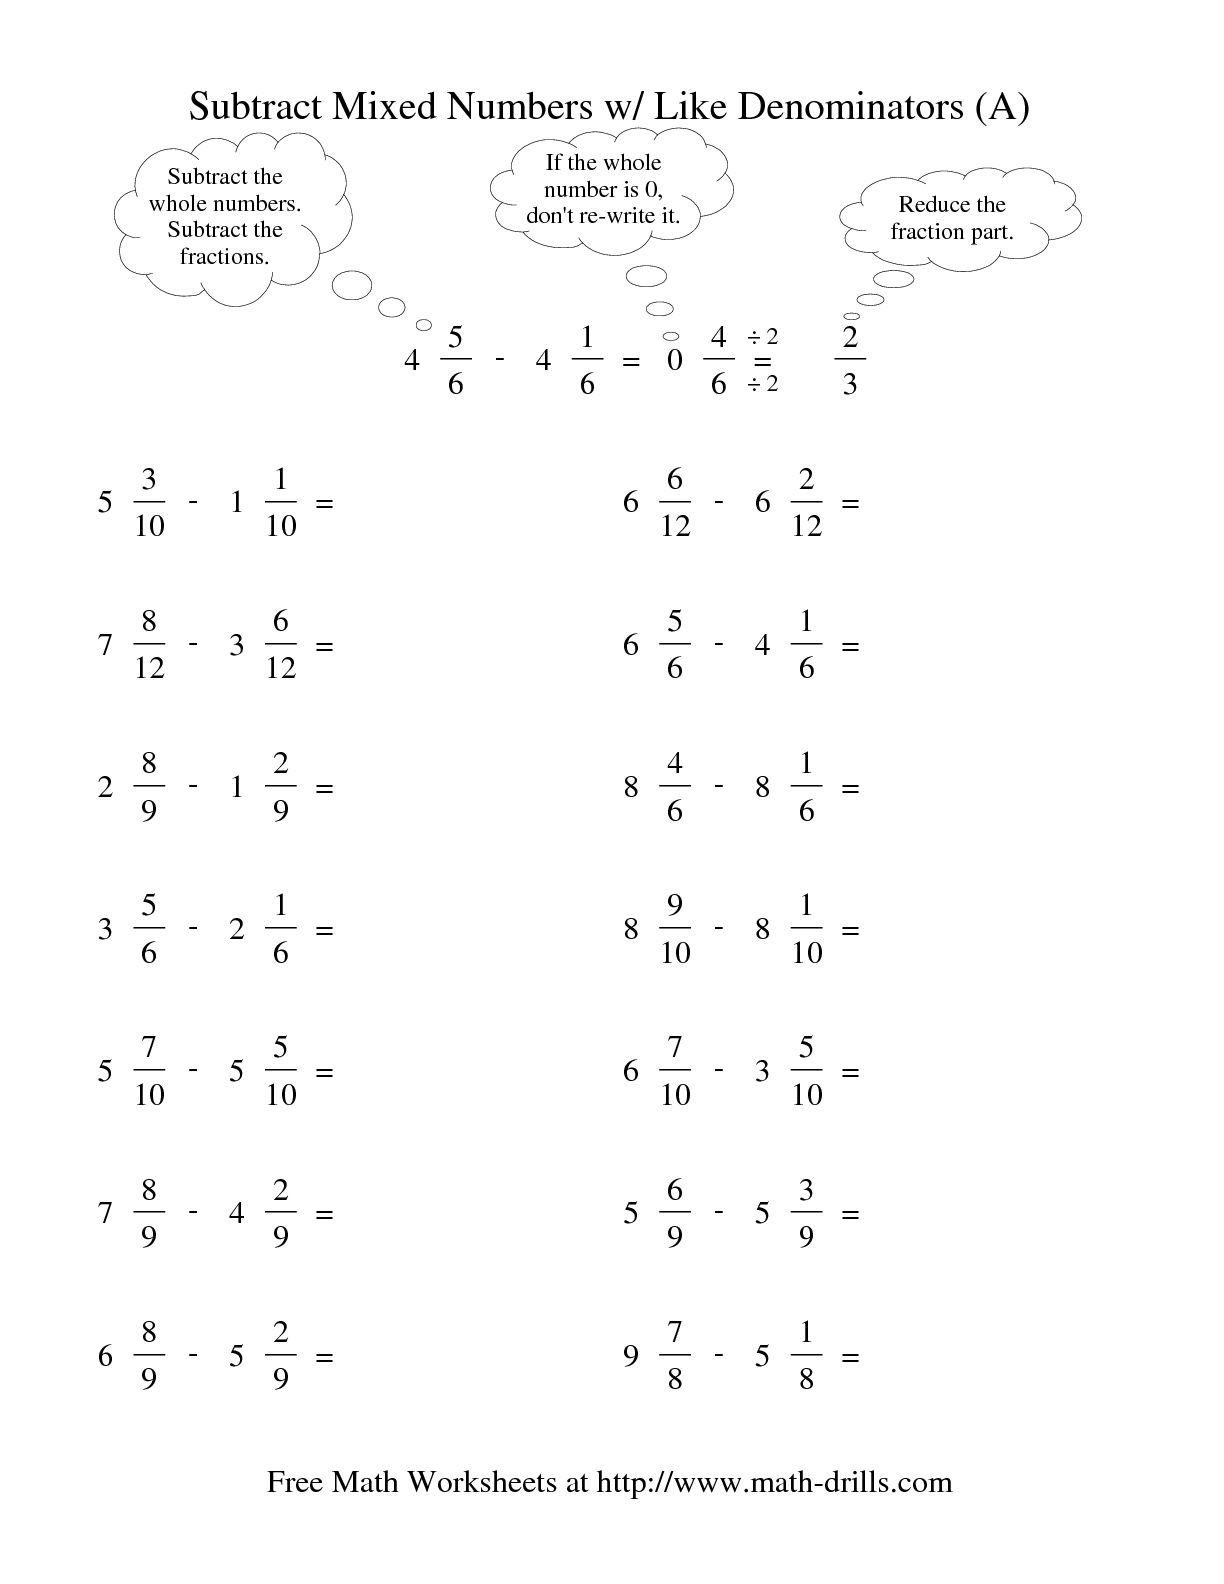 adding-and-subtracting-mixed-numbers-worksheets-number-worksheets-subtract-mixed-numbers